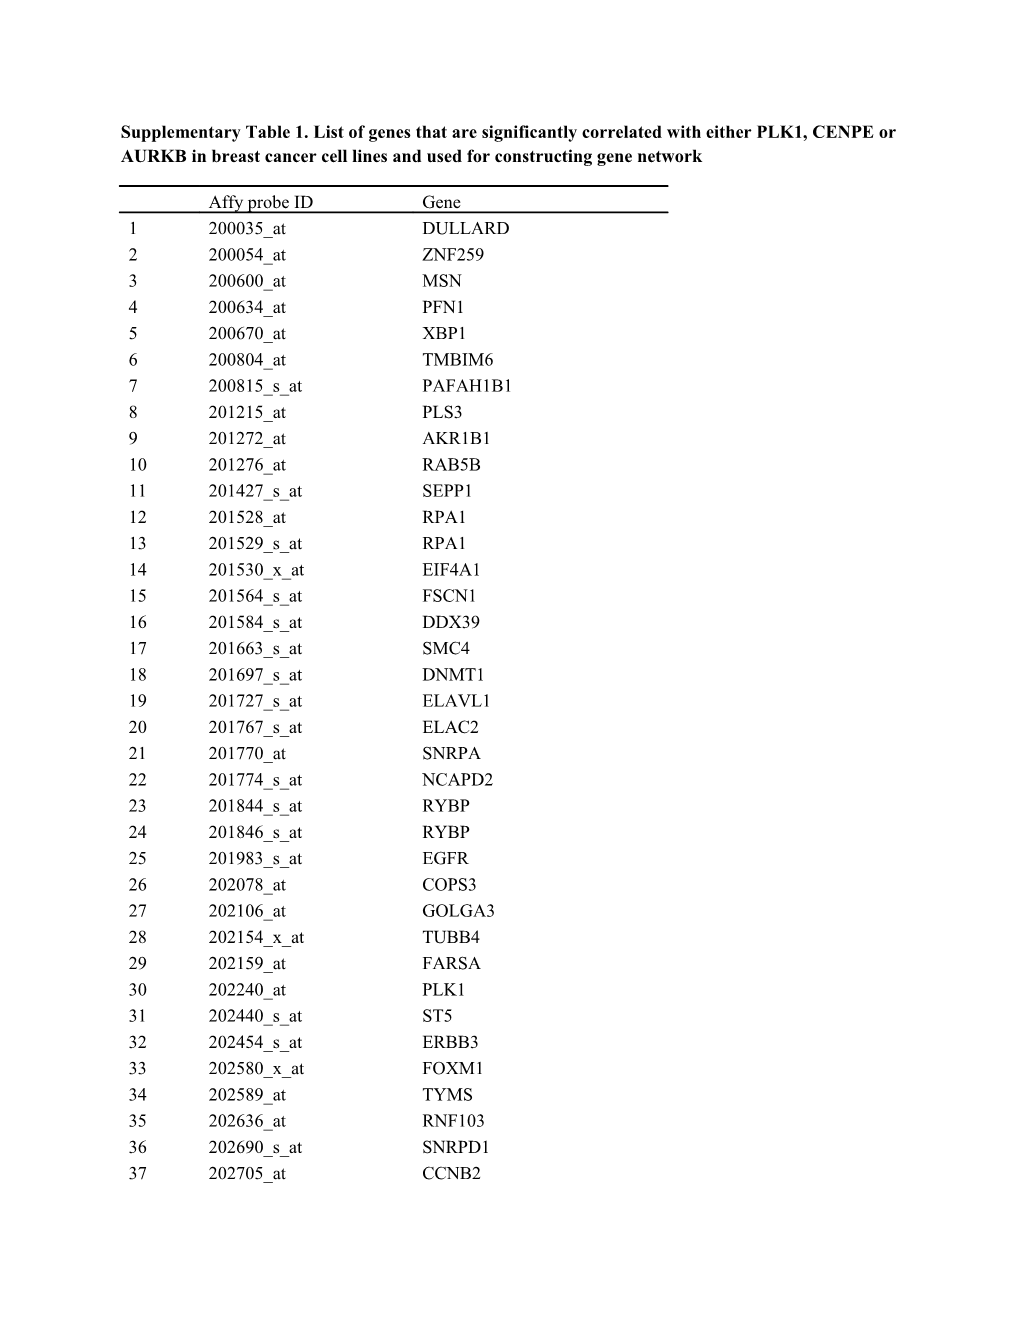 Supplementary Table 1. List of Genes That Are Significantly Correlated with Either PLK1